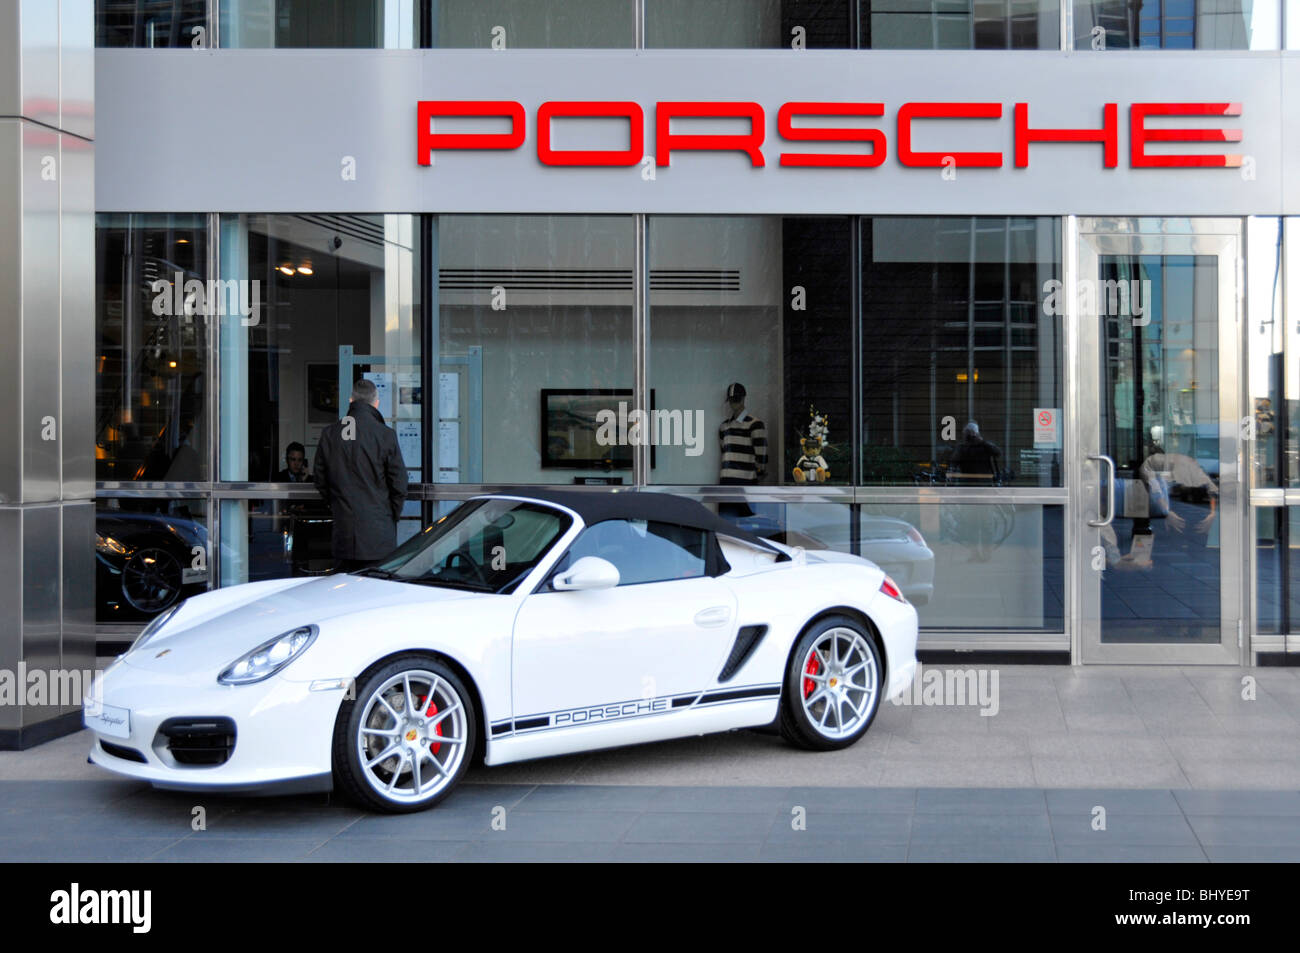 Porsche Boxster Spyder car on display outside car showroom at Canary Wharf Stock Photo